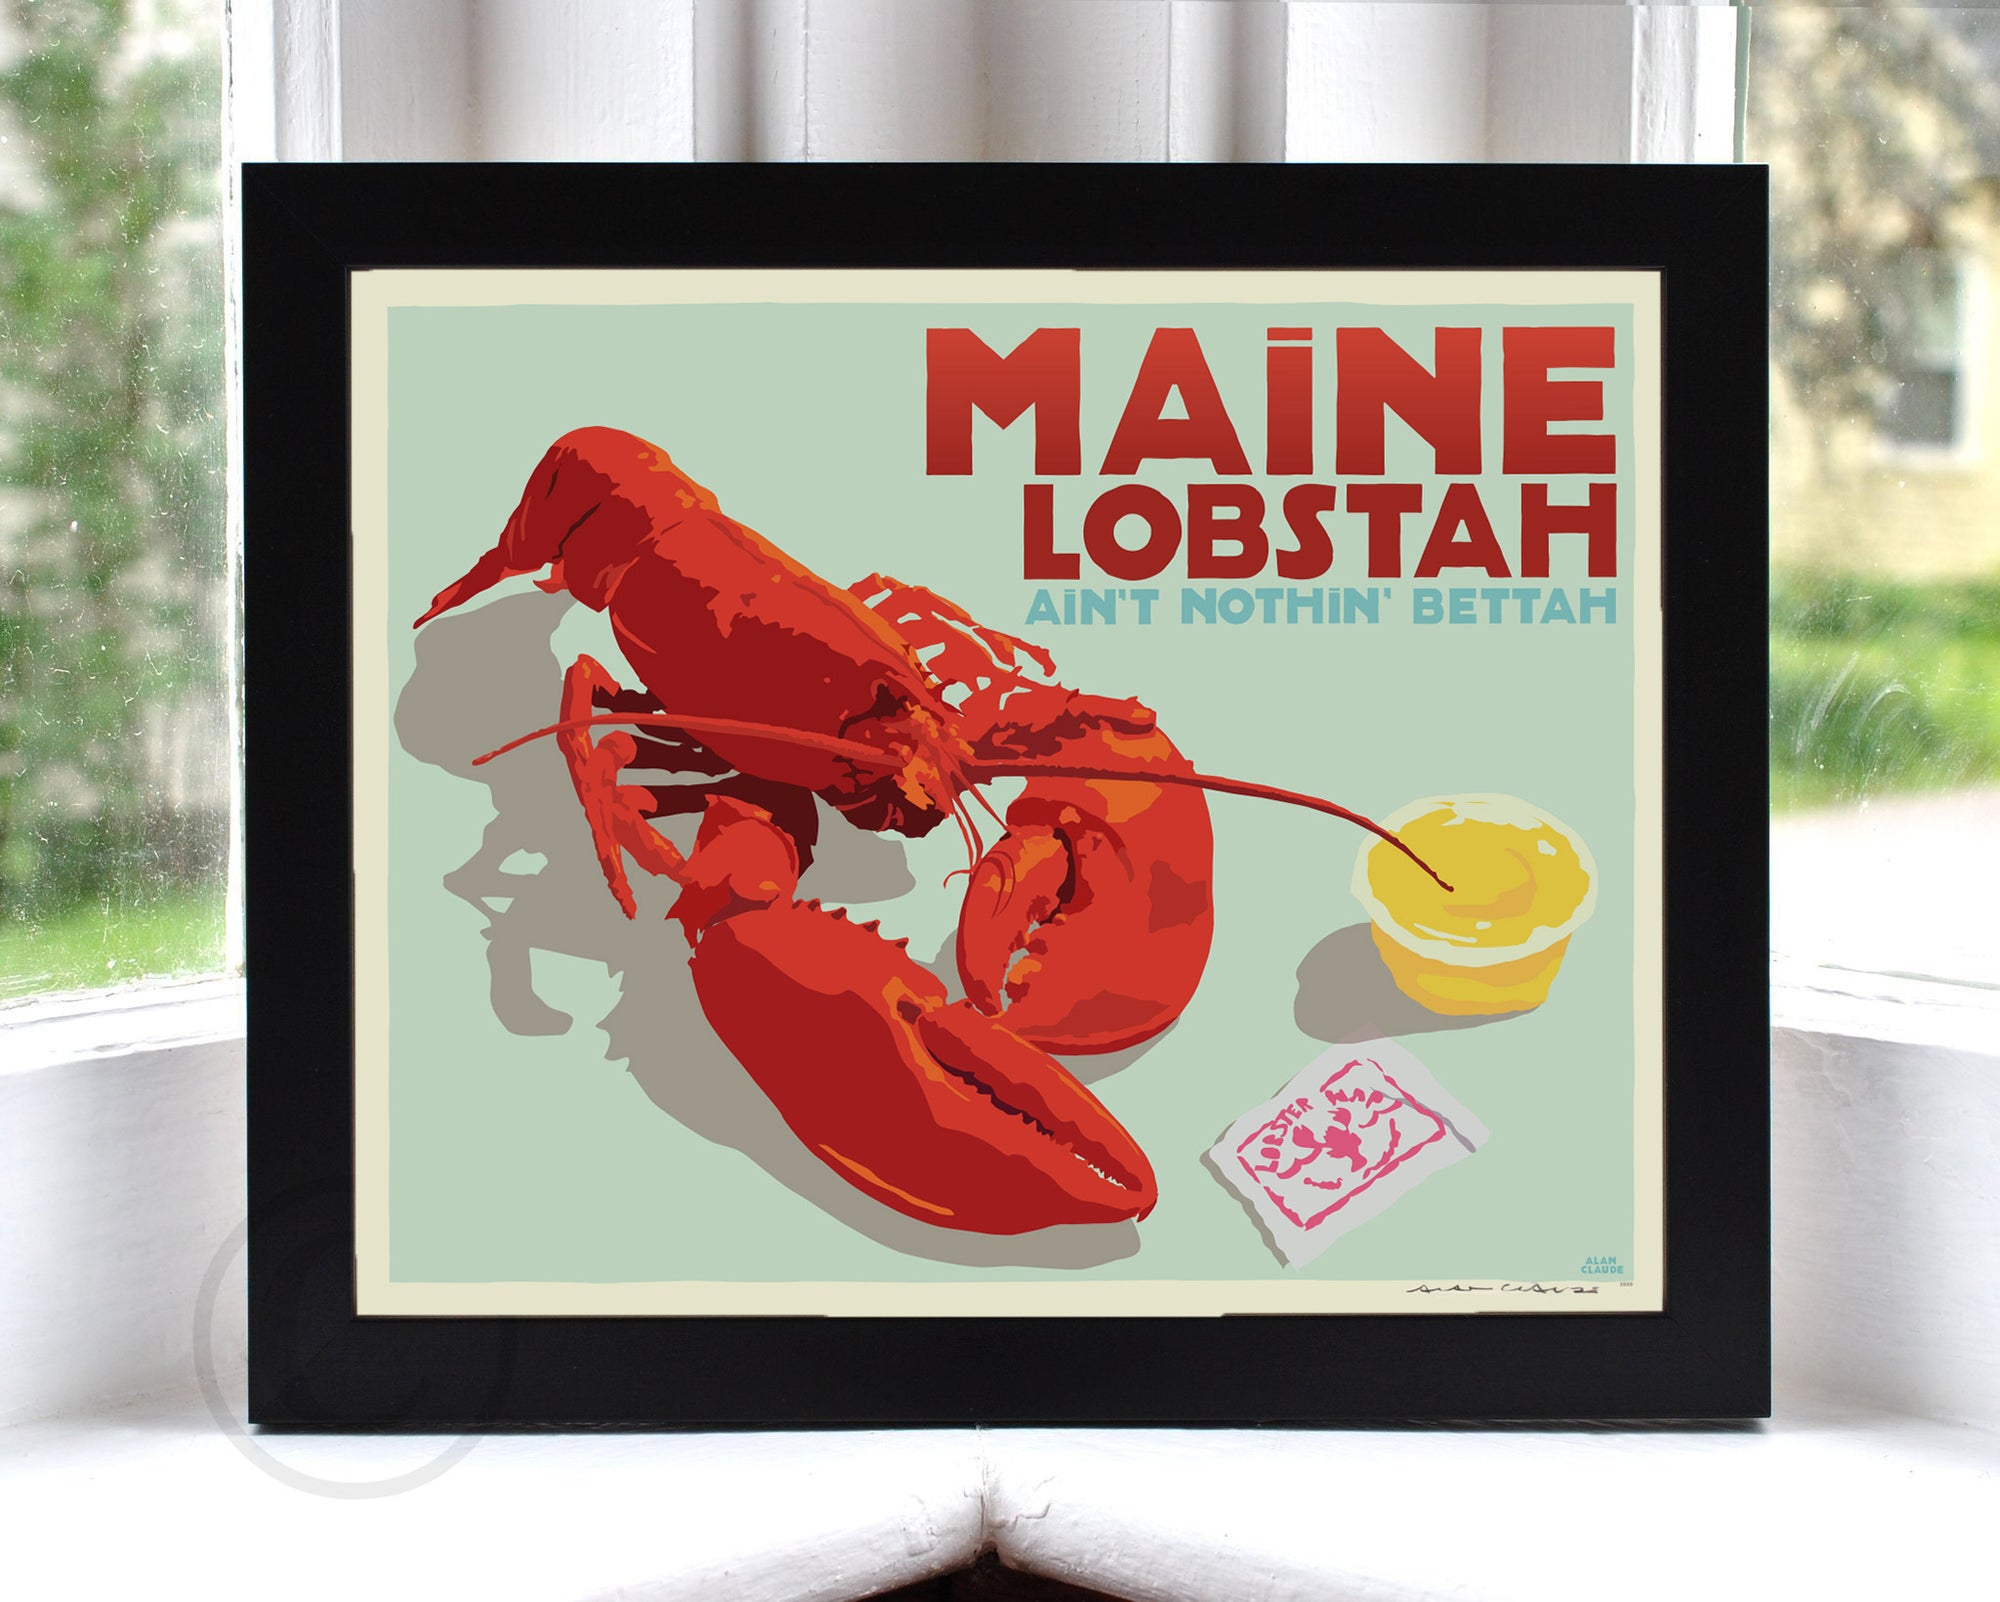 Maine Lobstah with Butter Art Print 8" x 10" Horizontal Framed Wall Poster By Alan Claude - Maine